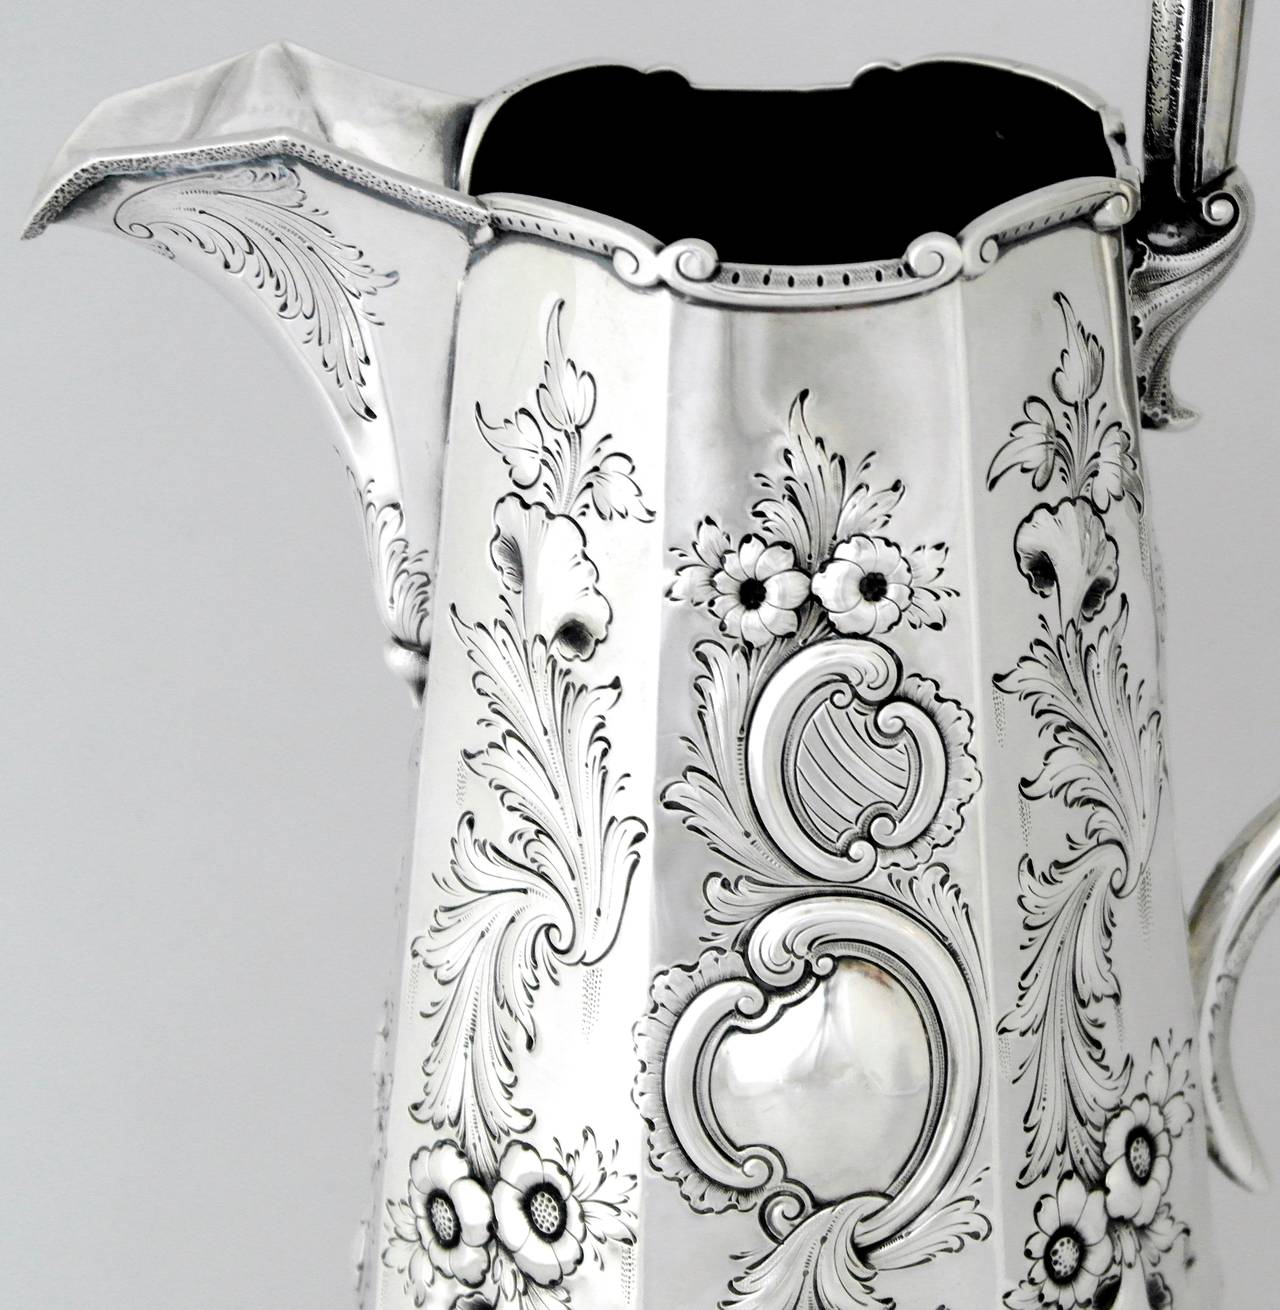 Being offered is a scarce circa 1840 coin silver pitcher by Robert & William Wilson of Philadelphia, Pennsylvania, comprising incredible hand chased foliate on the octagonal shaped pitcher, large square handle supported by four intricate feet.